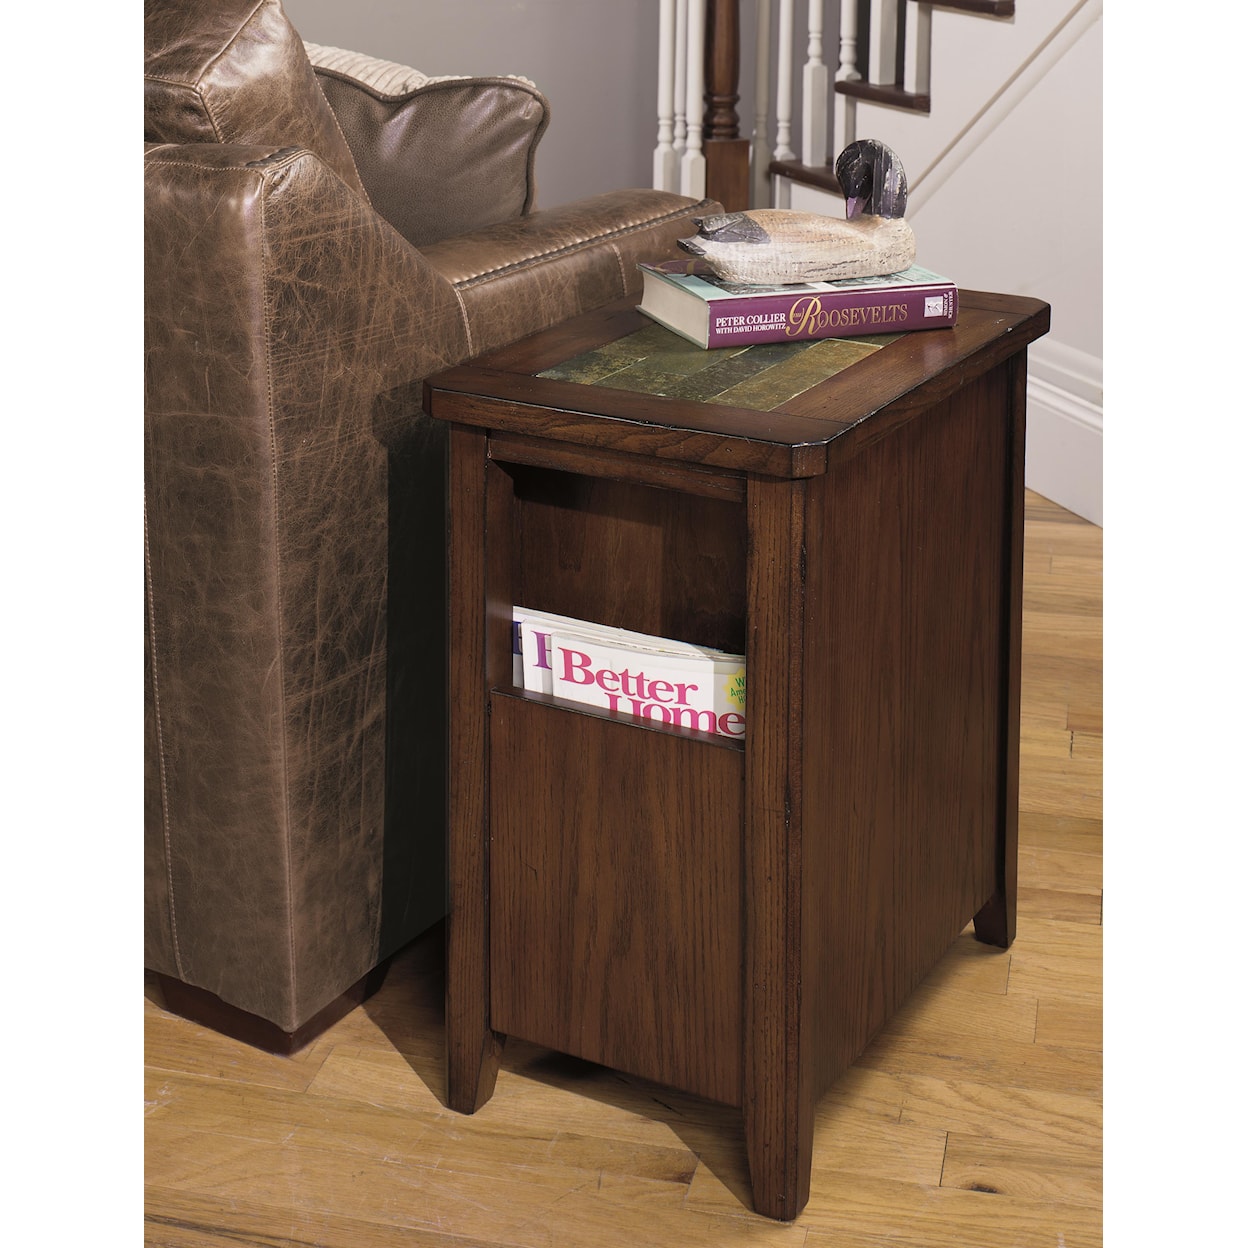 Null Furniture 5013 Chairside Cabinet